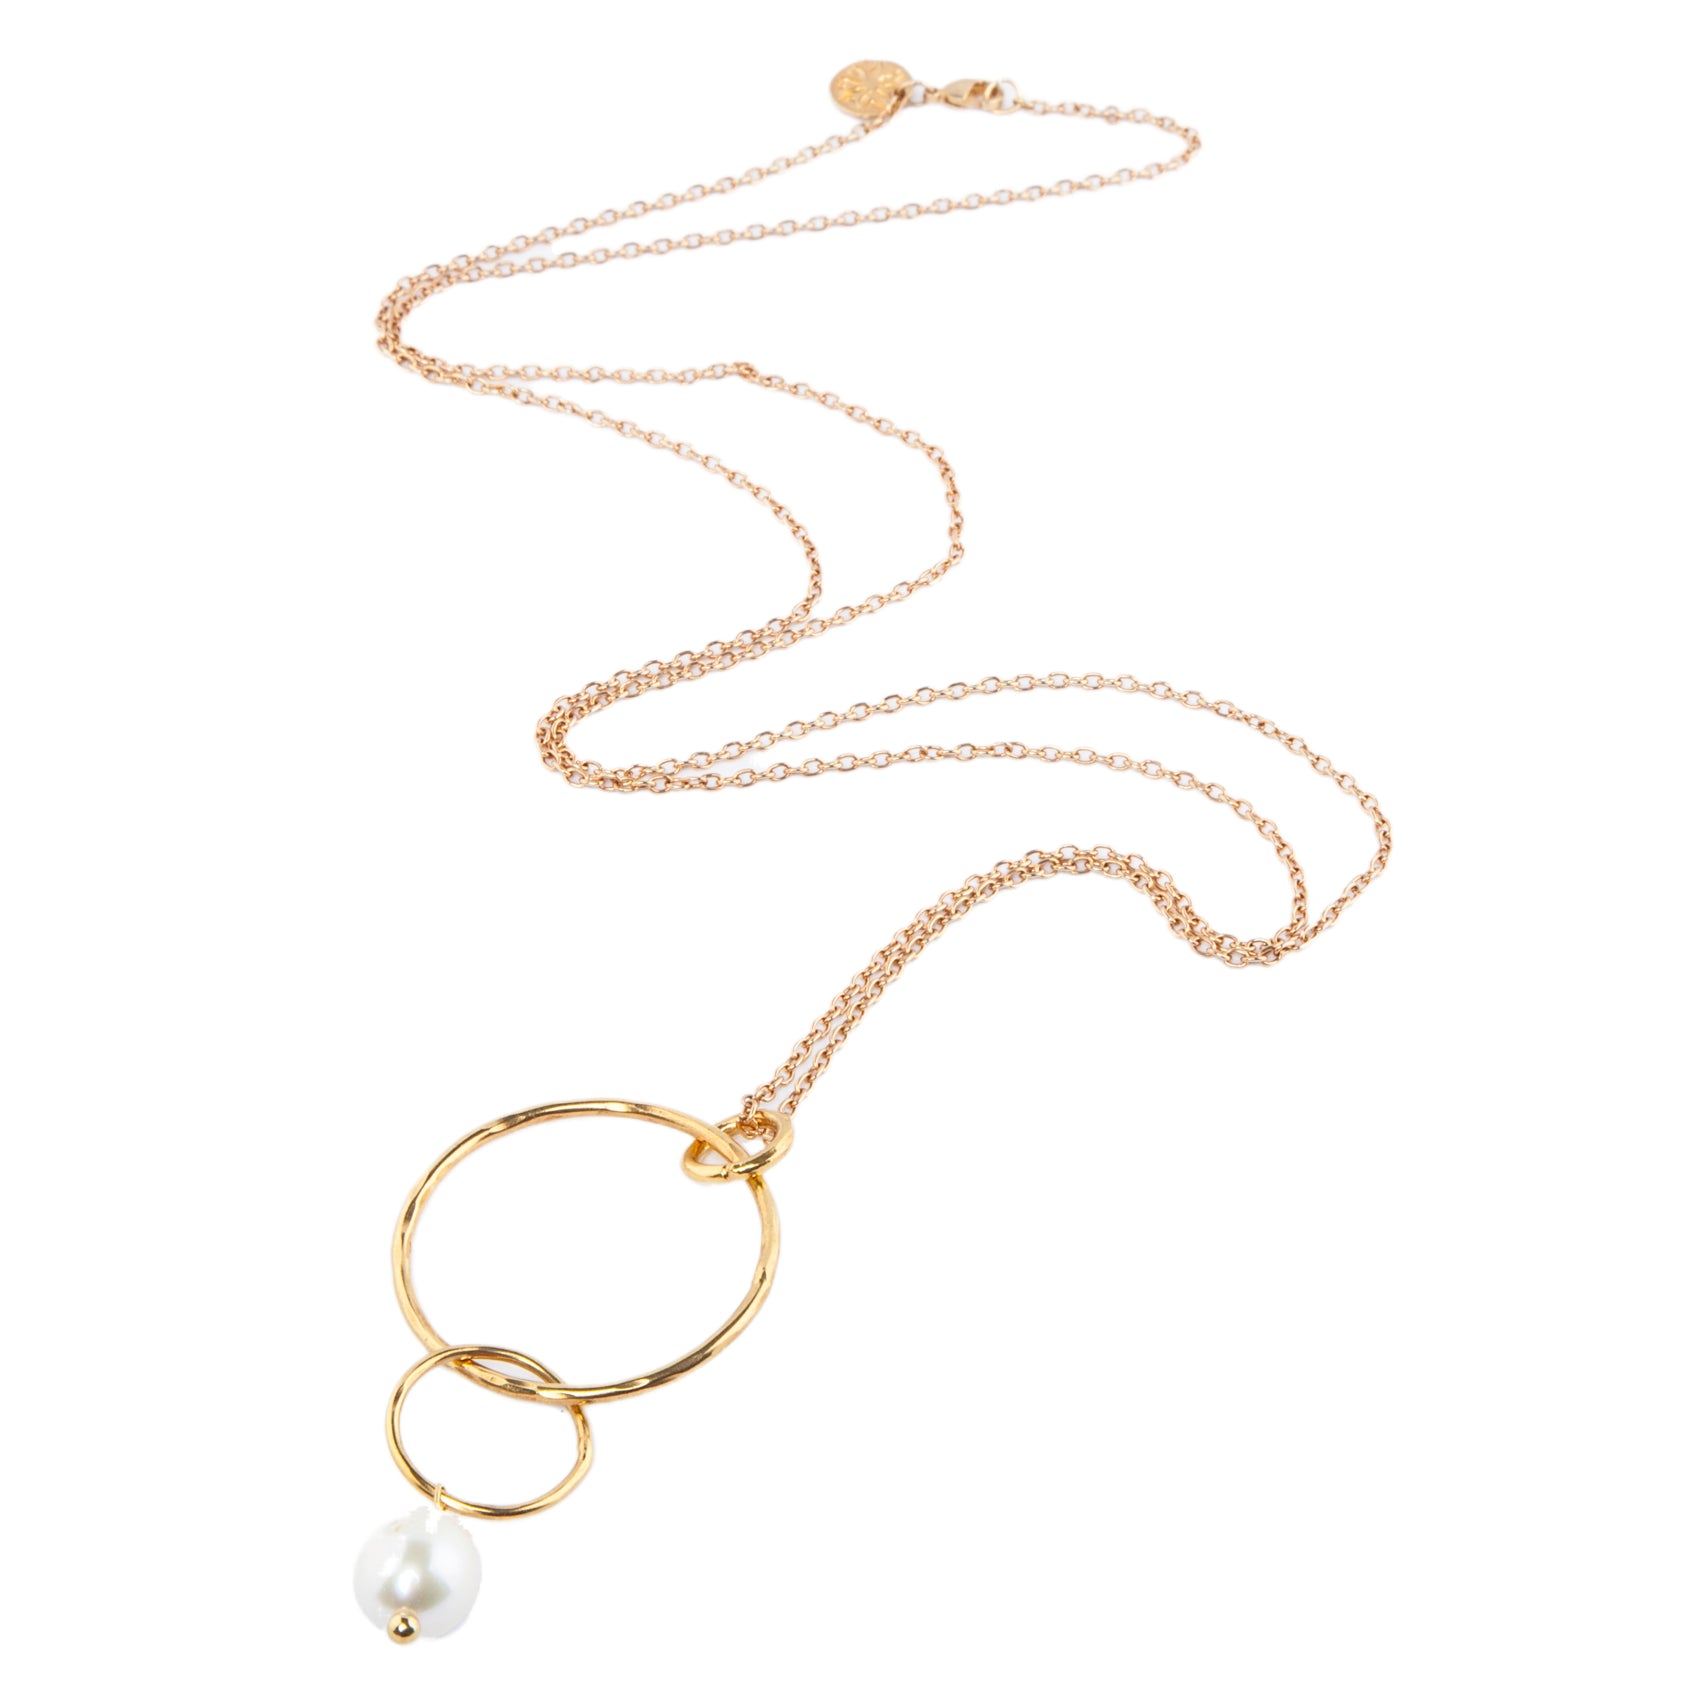 Freshwater Pearl Gold Pendant Necklace - Fairmile